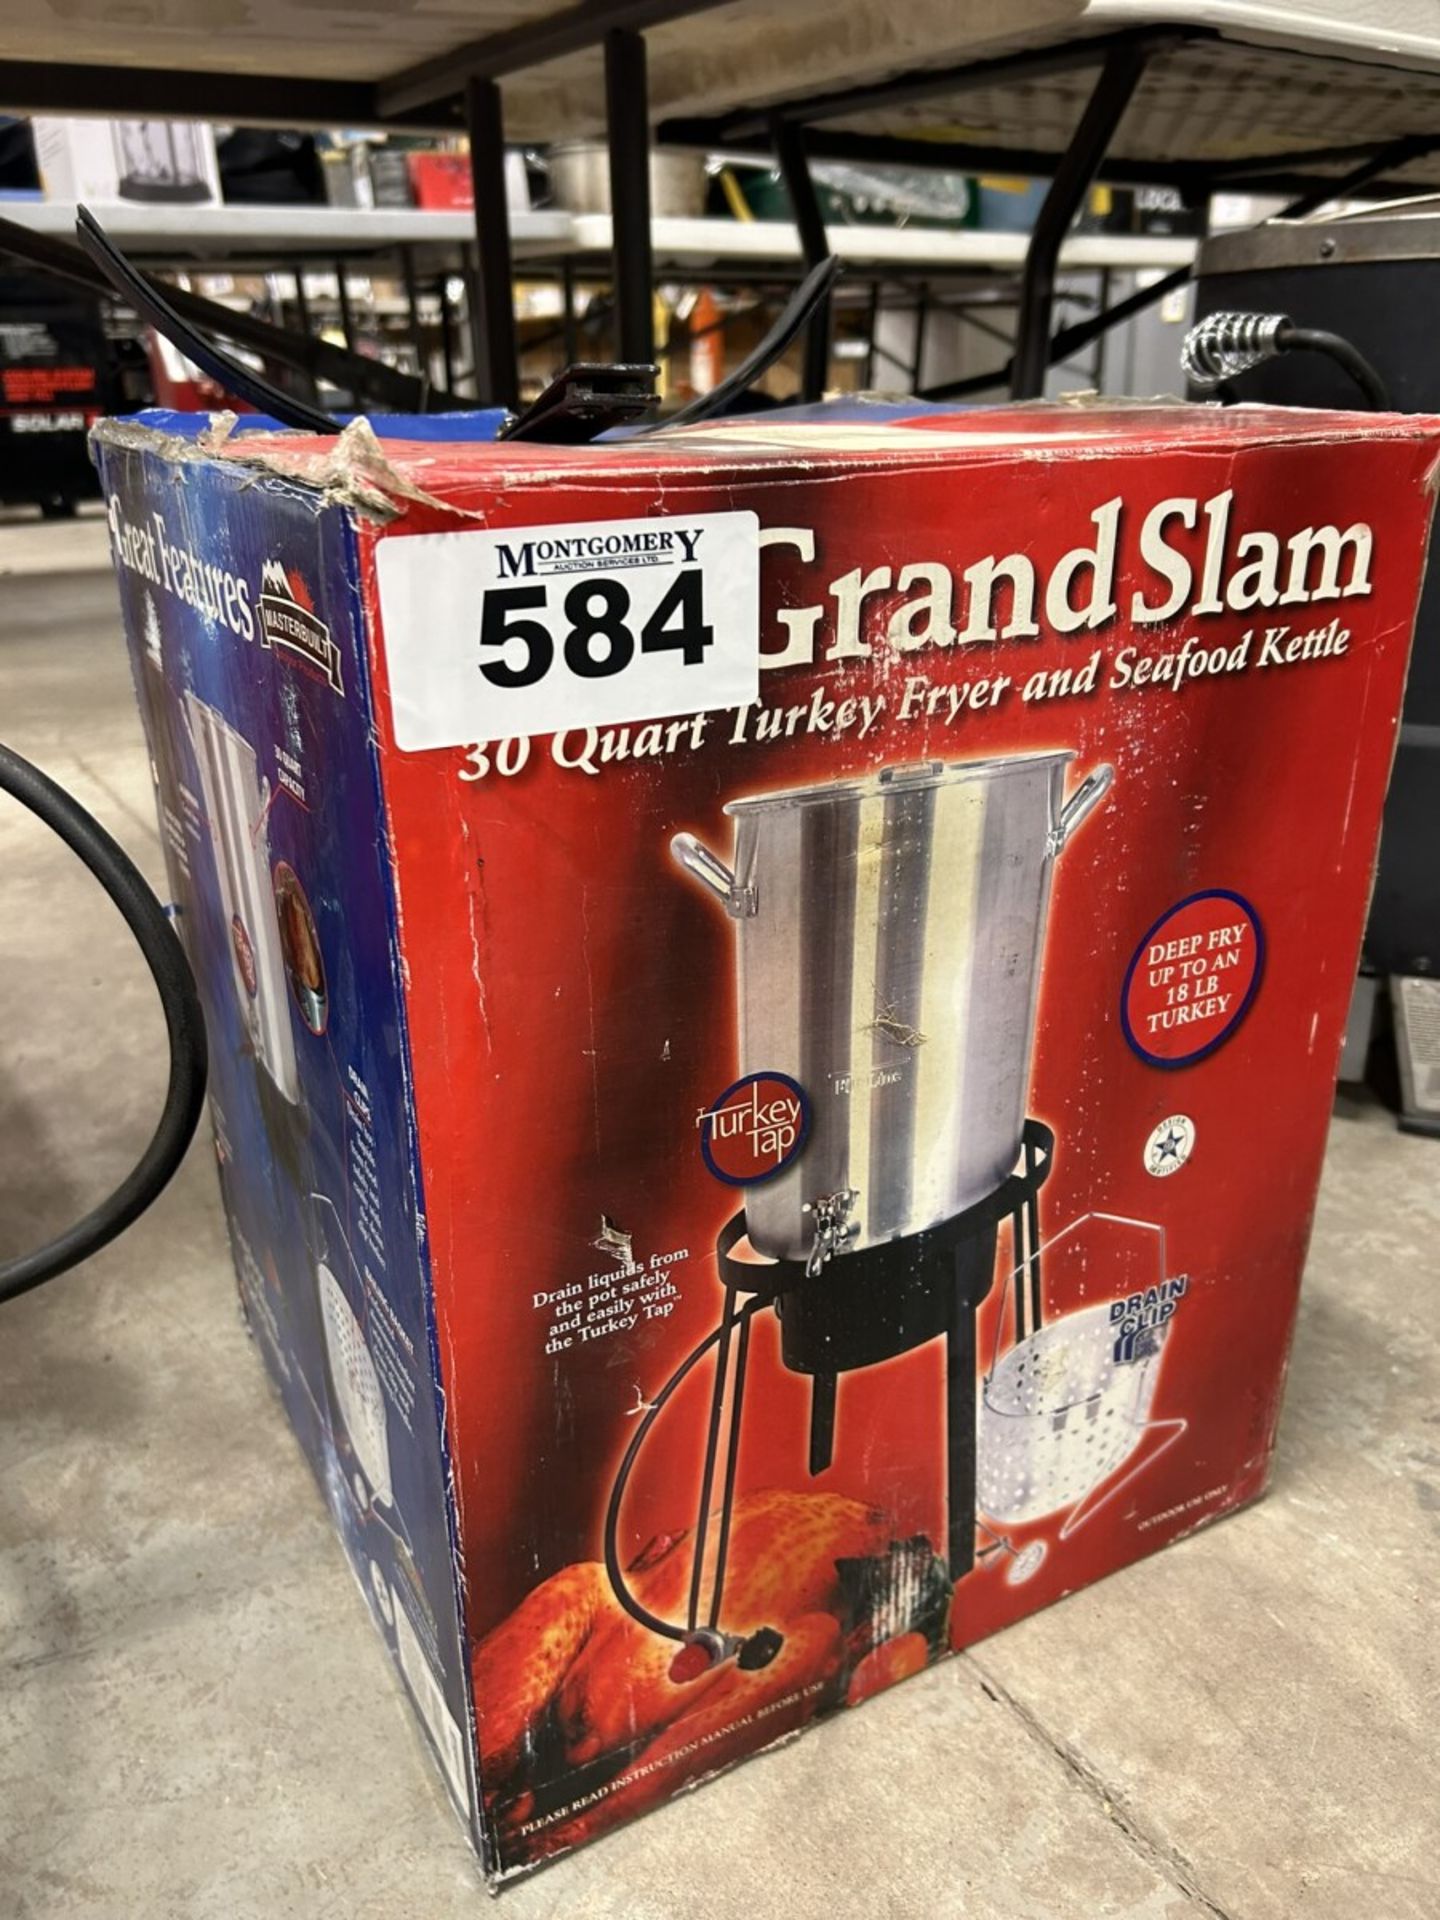 GRAND SLAM 30 QT. TURKEY FRYER AND SEAFOOD KETTLE - Image 2 of 5